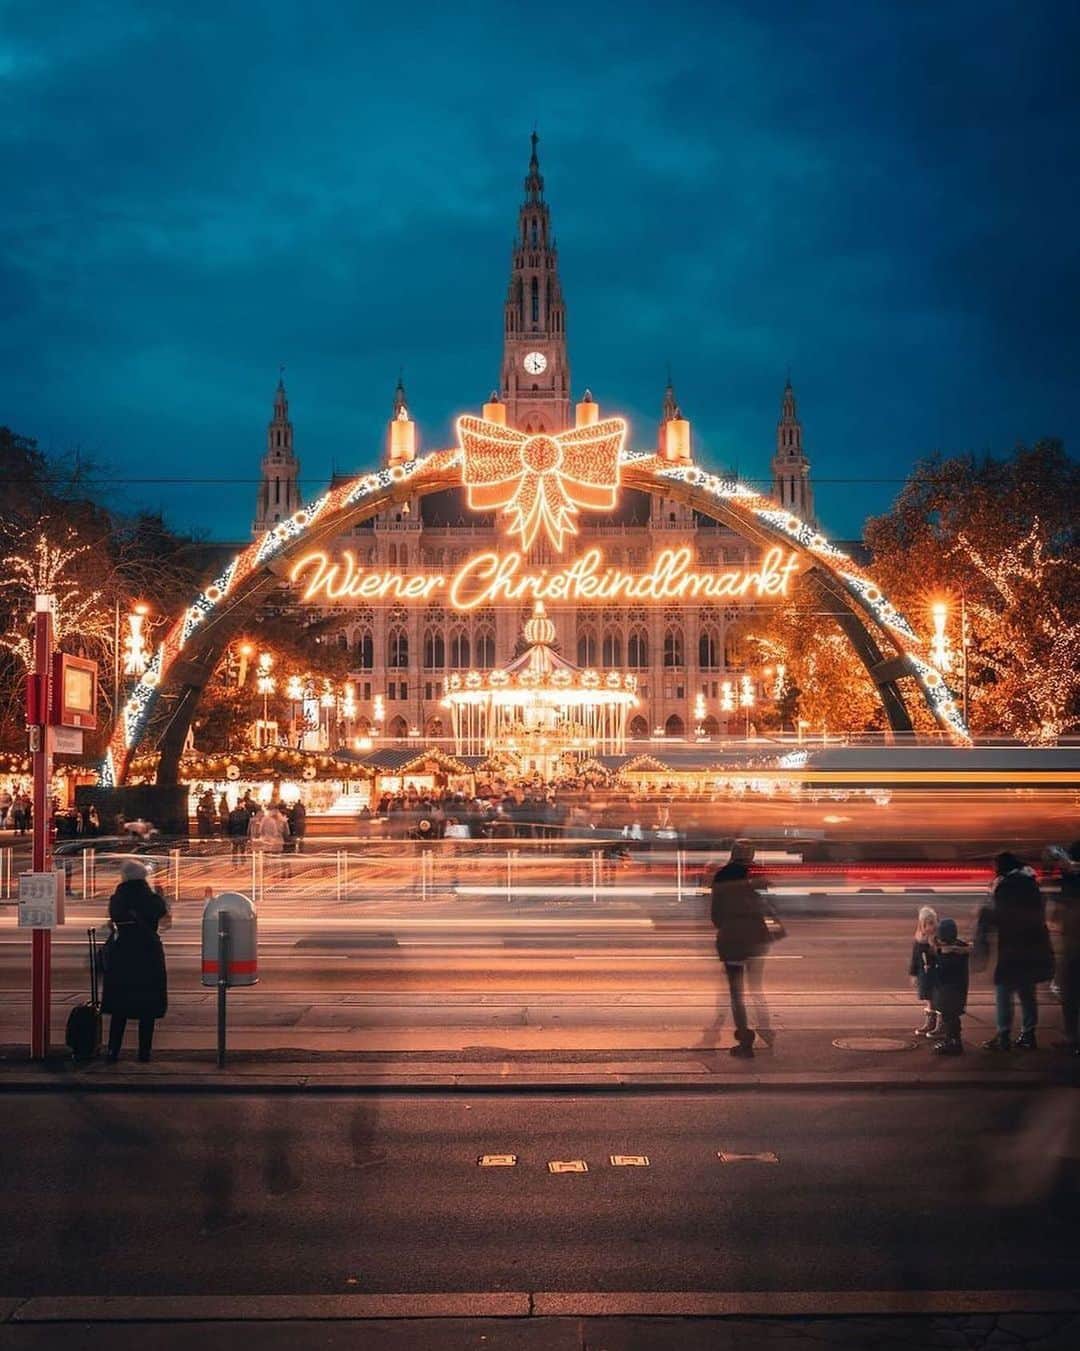 Wien | Viennaのインスタグラム：「A tall arched gateway with candles welcomes you at the entrance to the Viennese Christmas Market on City Hall Square. 💫 The traditional Christmas Market offers Christmas gifts, Christmas tree decorations, handicrafts, culinary treats, confectionery, and warming drinks. 🎁 by @christian_kremser #ViennaNow  #CelebrateVienna #ViennaNow #christmasmarket #christmasmarkets #christmasdecorations #christmastime #vienna #wien #vienna _city #vienna_austria #1000thingsinvienna #viennawurstelstand #viennagram」